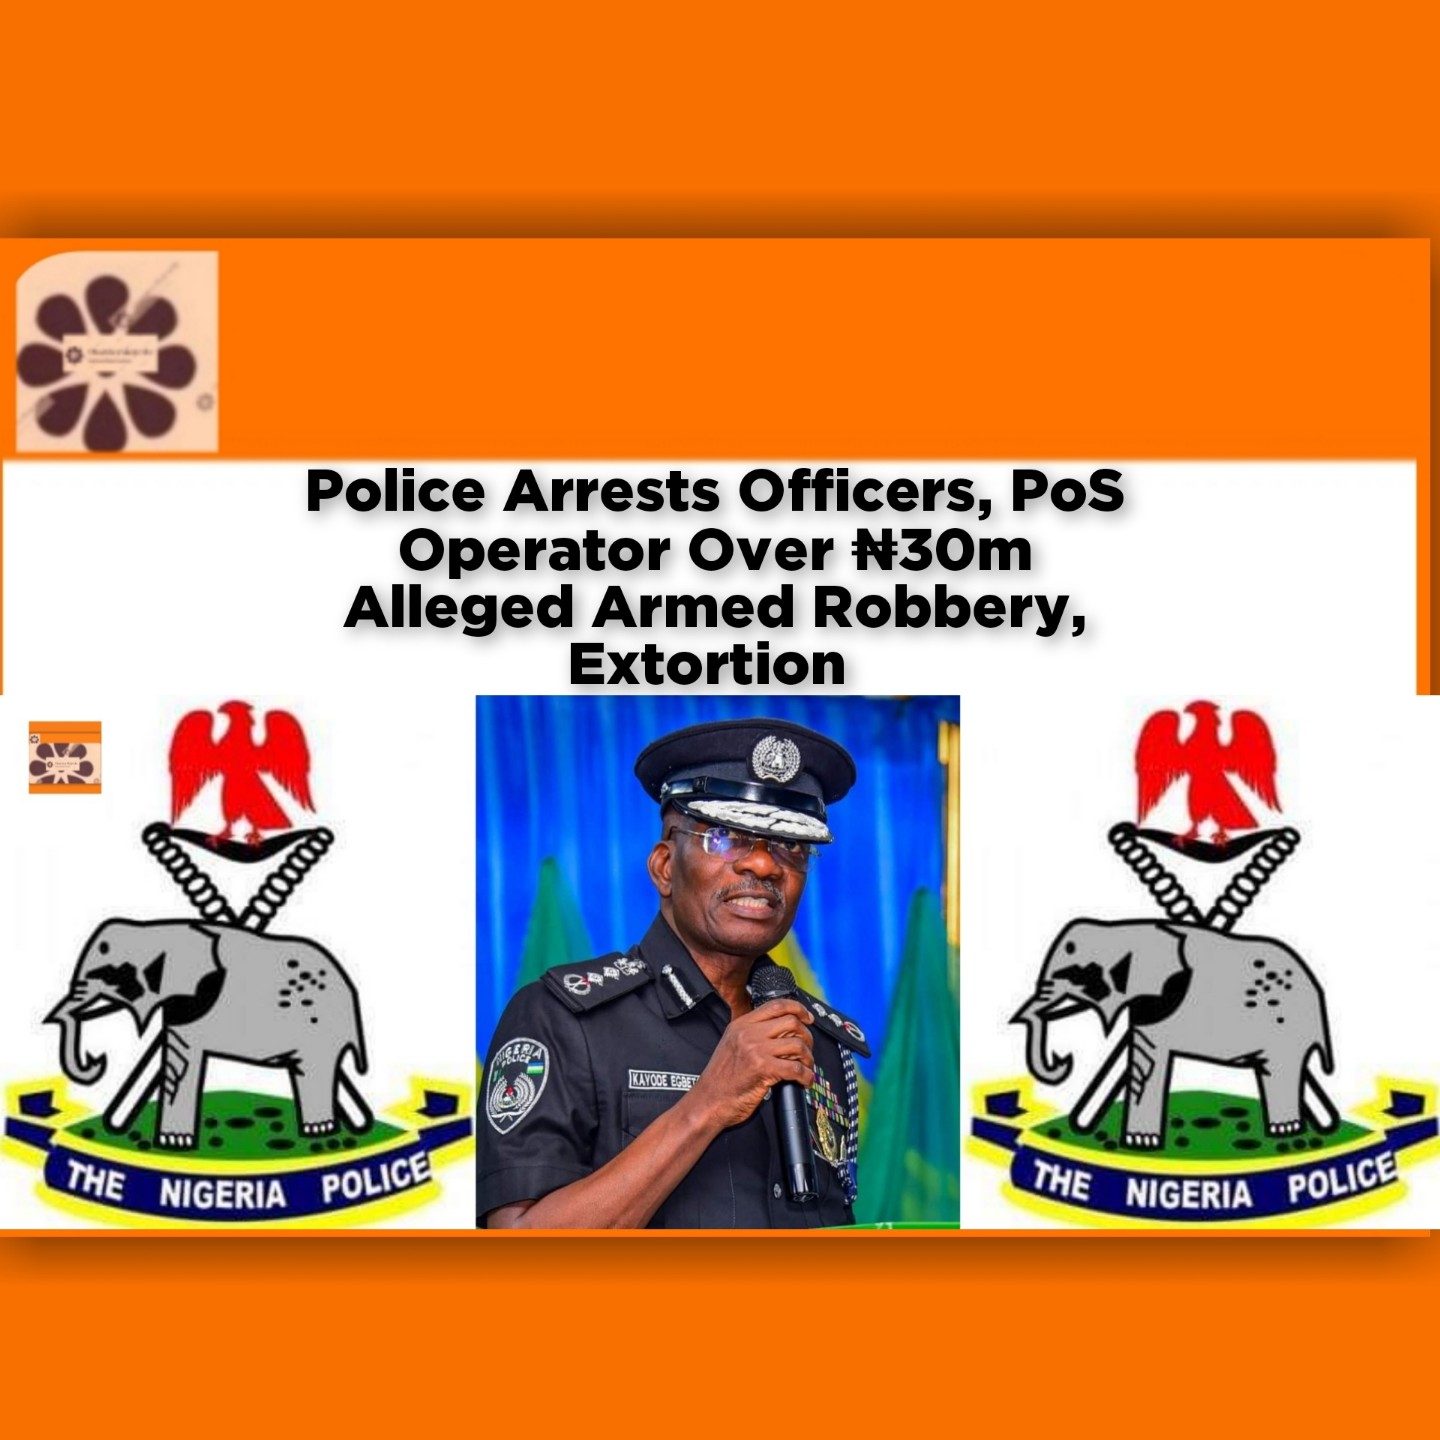 Police Arrests Officers, PoS Operator Over ₦30m Alleged Armed Robbery, Extortion ~ OsazuwaAkonedo #ArmedRobbery #Extortion #NPF #Police #security